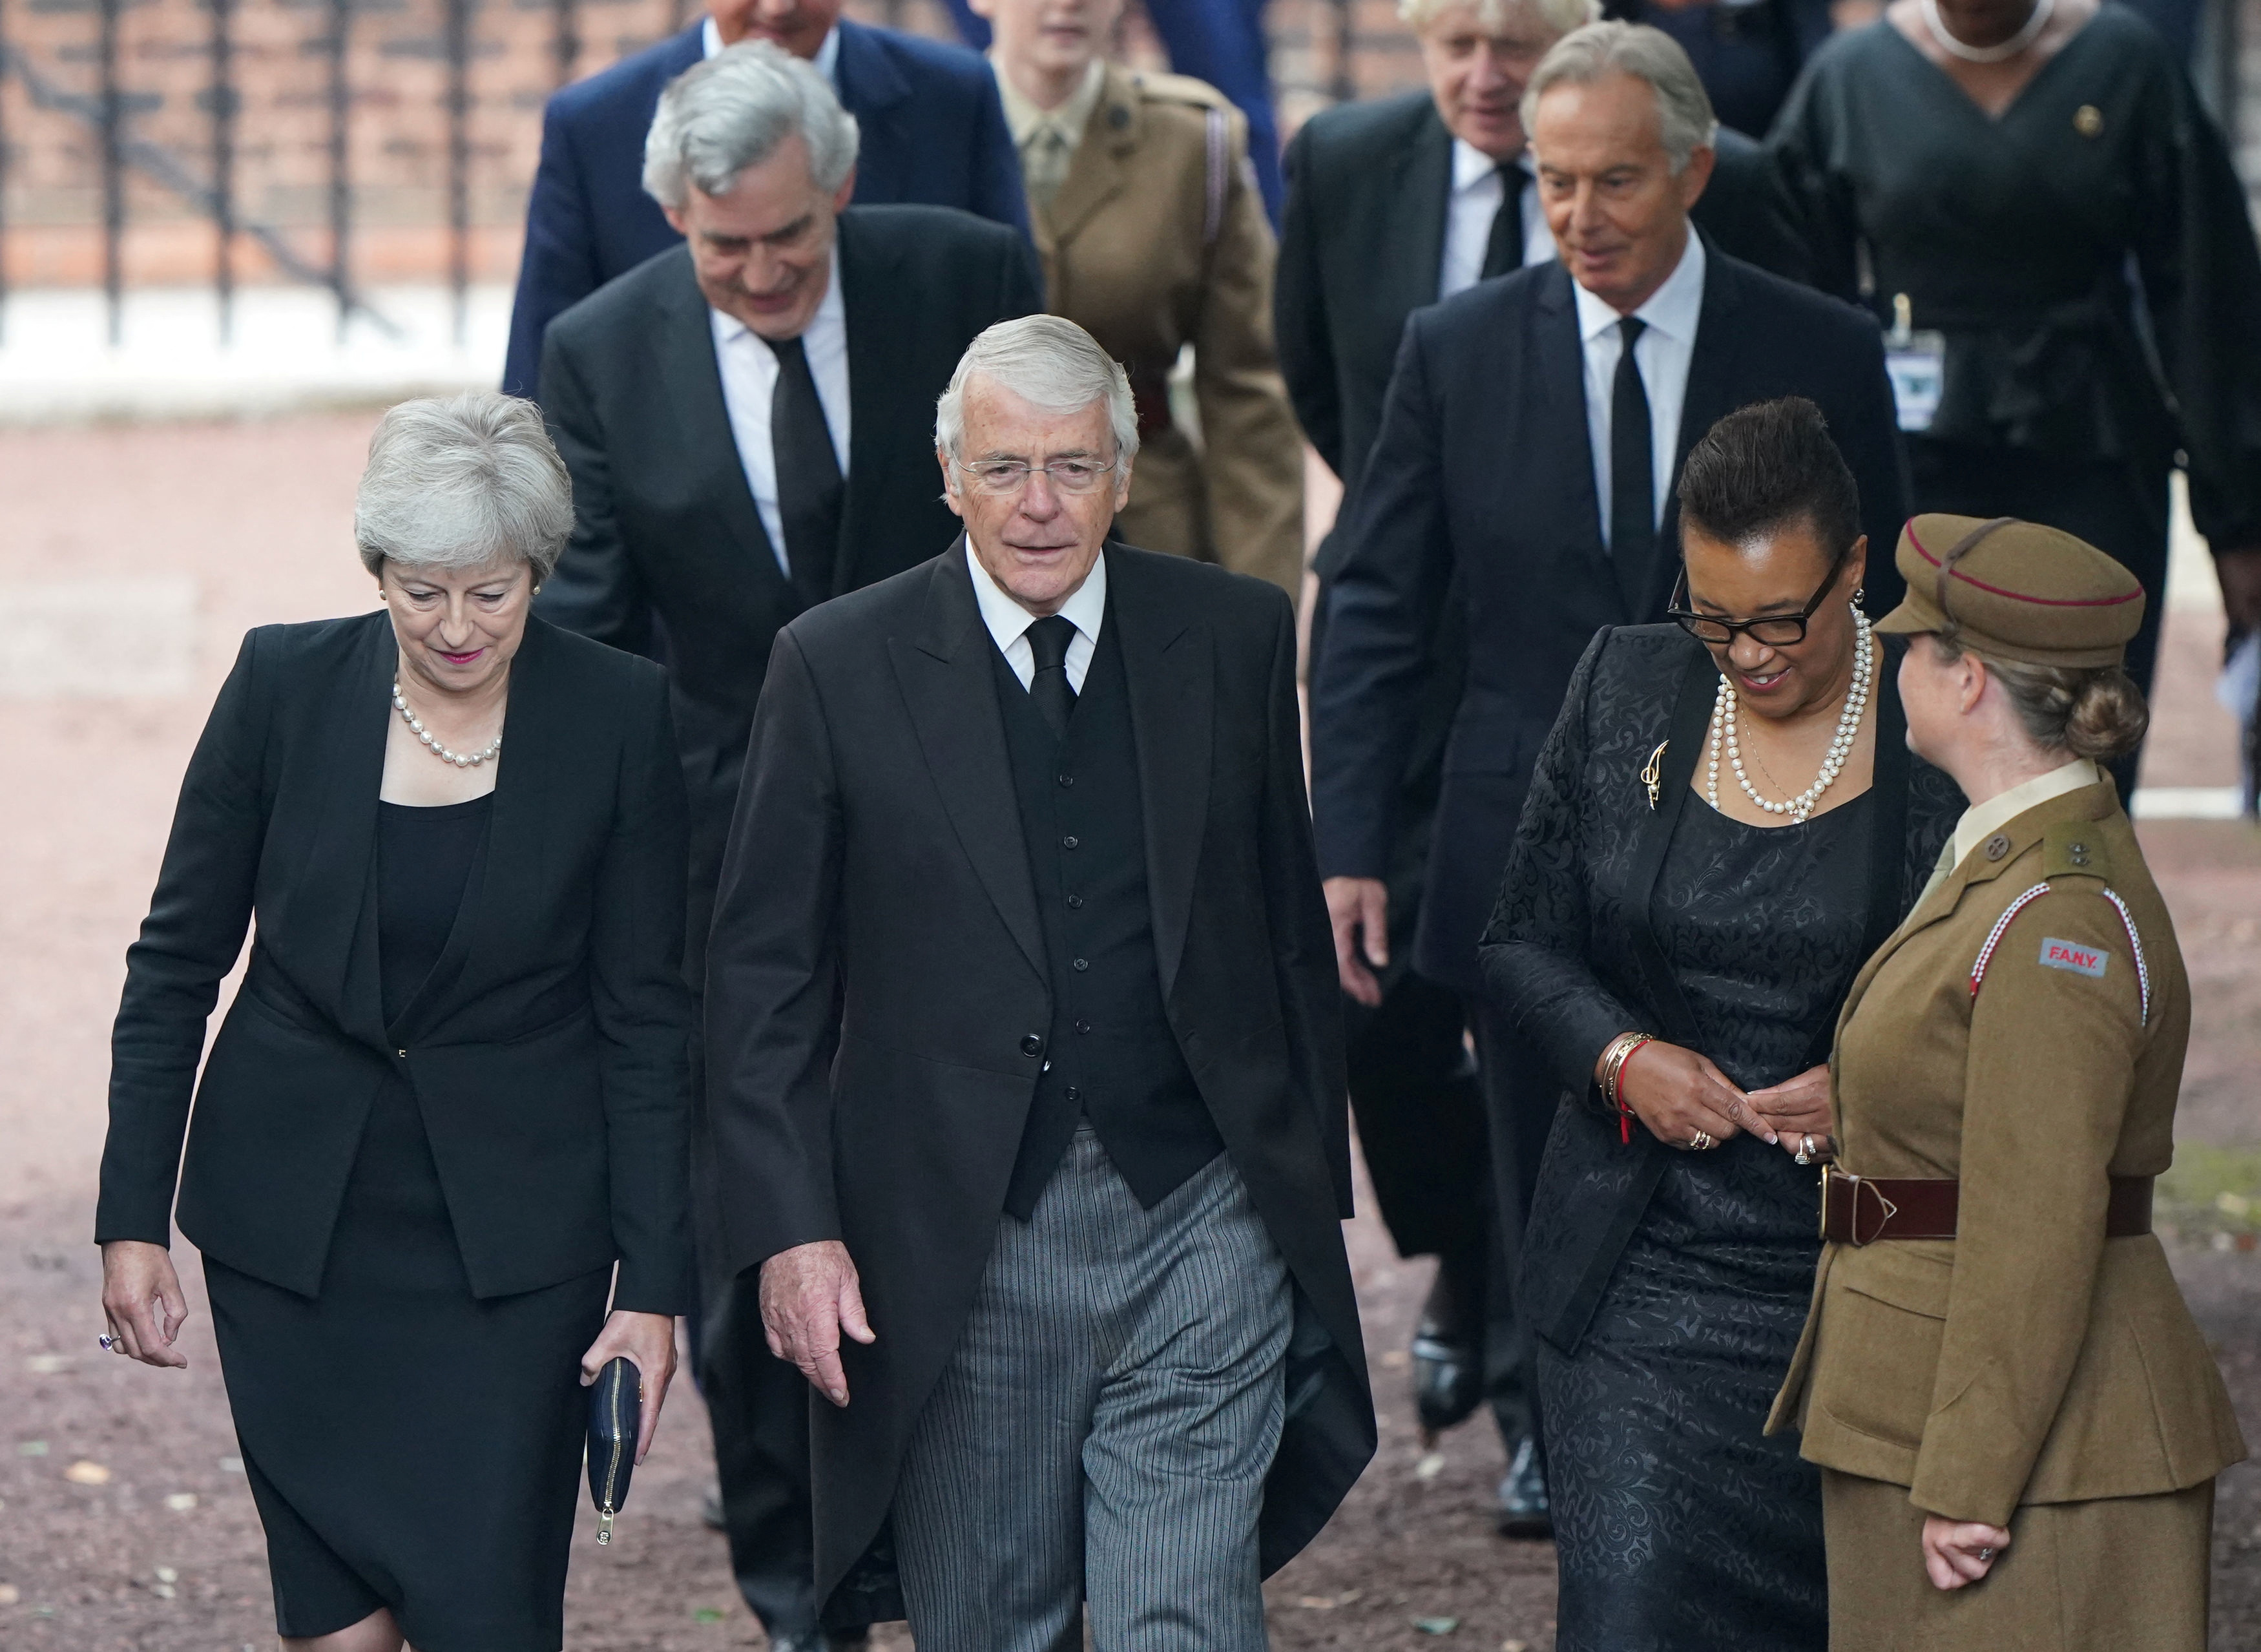 Former British Prime Ministers Theresa May, John Major, and Baroness Scotland arrive for the Accession Council ceremony at St James's Palace, where Britain's King Charles III will be proclaimed Britain's new monarch, following the death of Queen Elizabeth II, in London, Britain September 10, 2022.  Joe Giddens/Pool via REUTERS